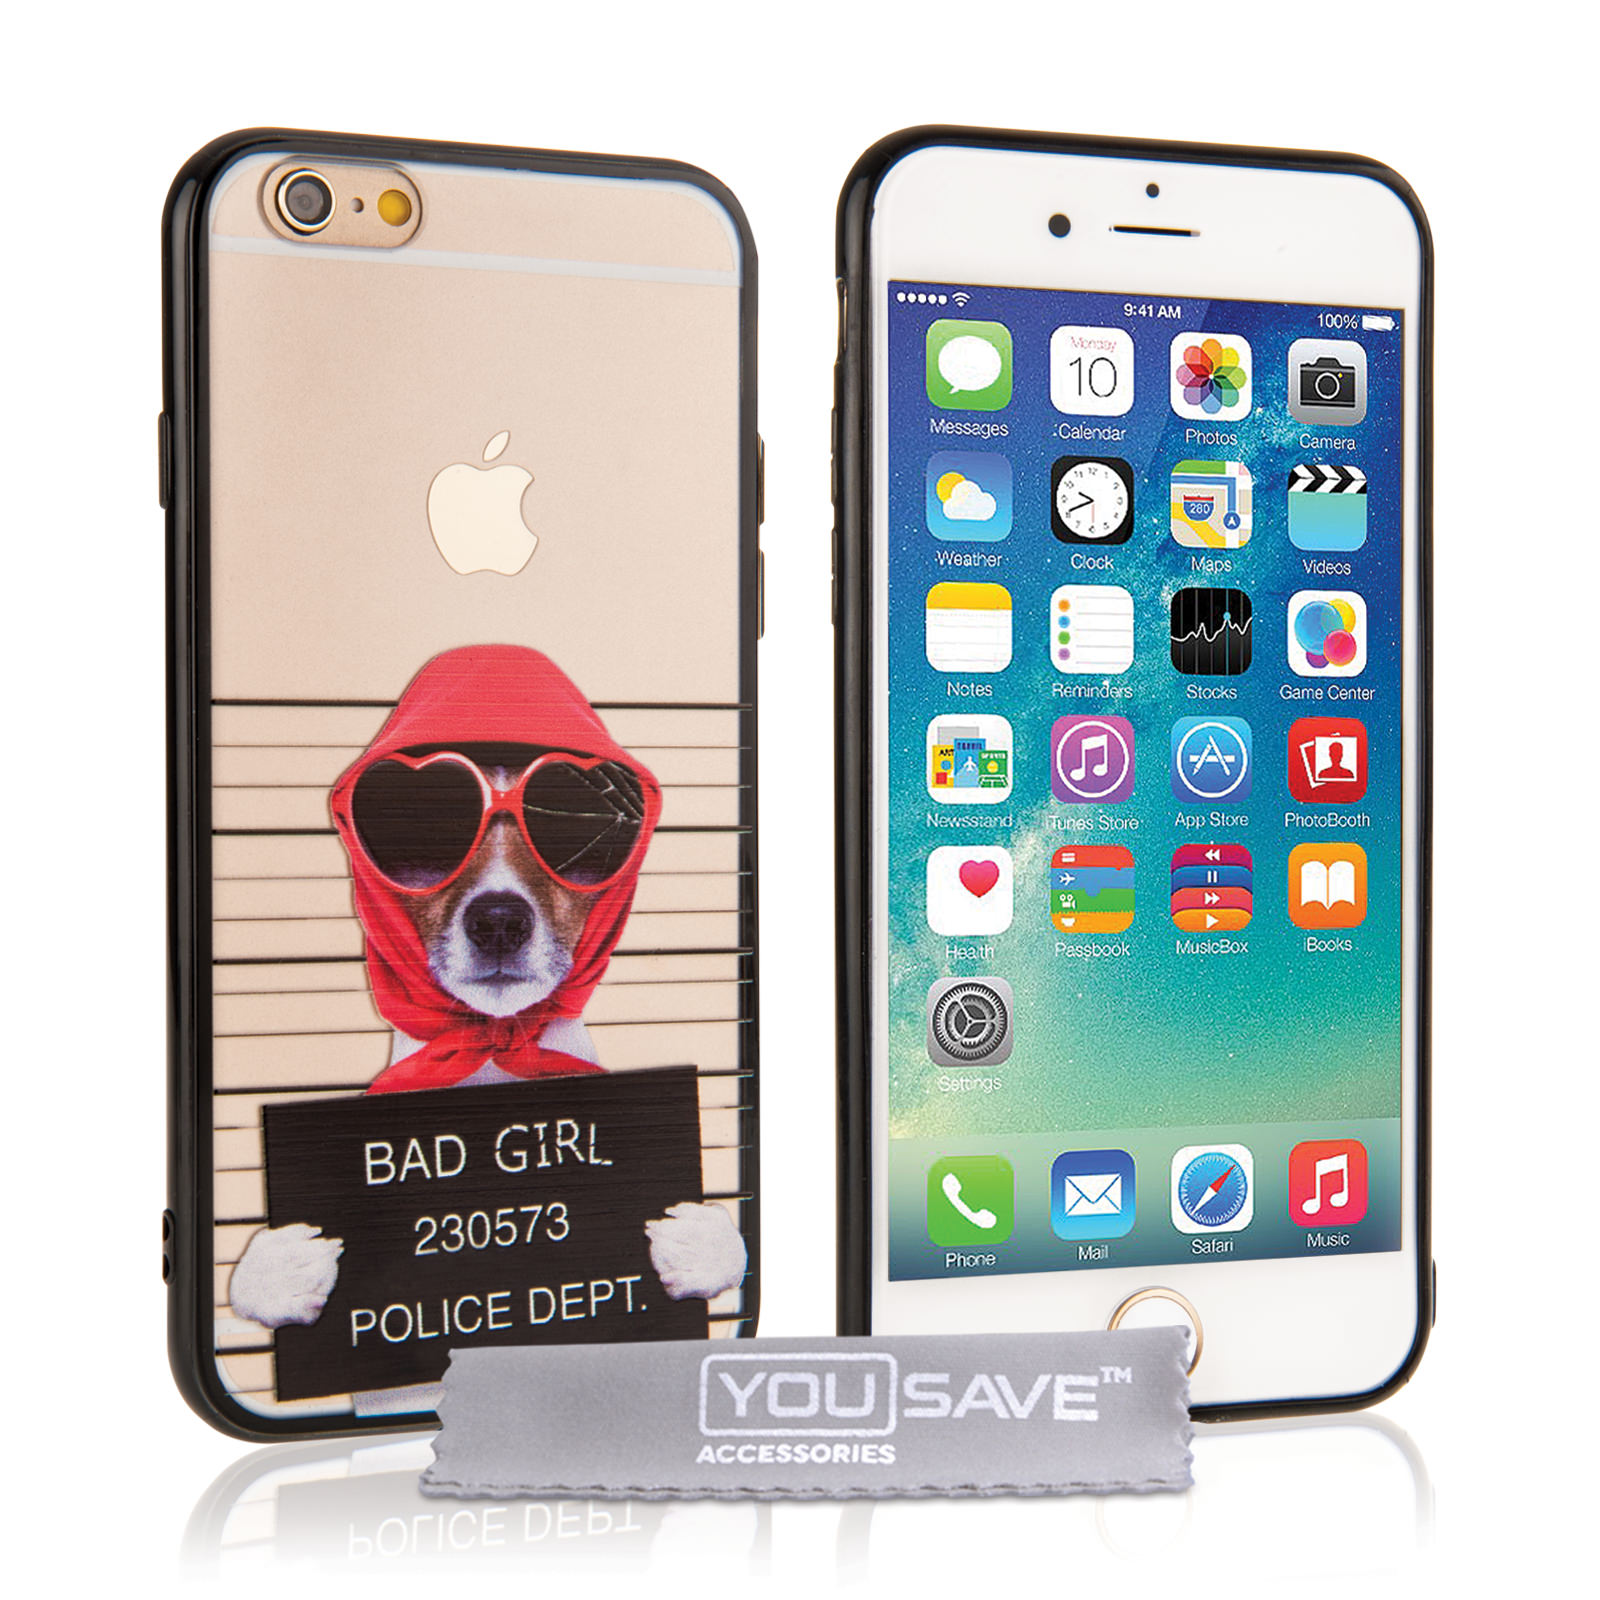 Yousave Accessories iPhone 6 and 6s Fun Case - Bad Girl Design